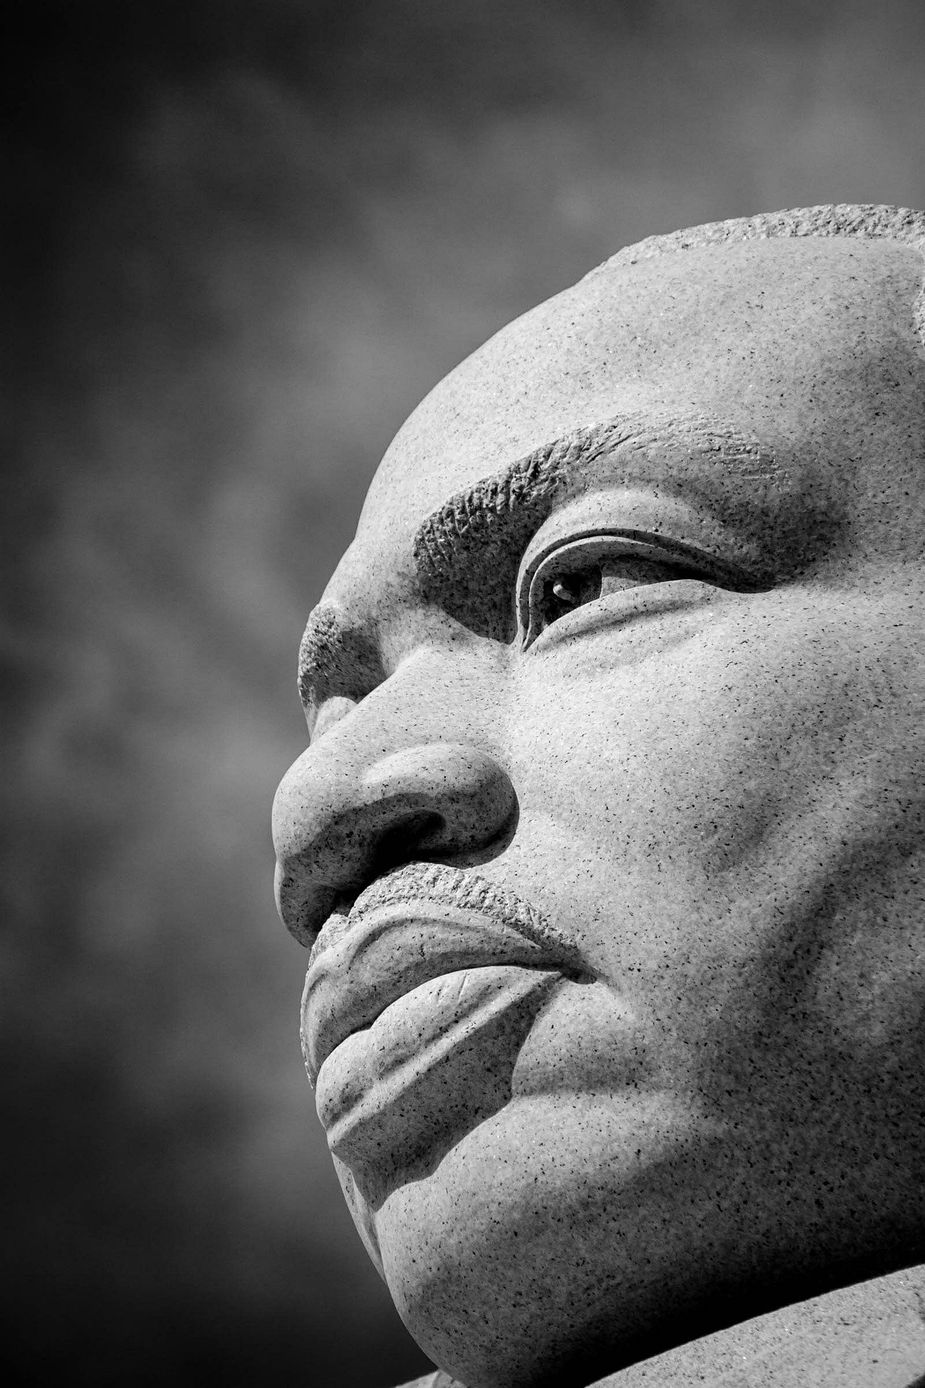 Events celebrating the life and legacy of Martin Luther King Jr. take place across the state. Photo by LuAnn Hunt